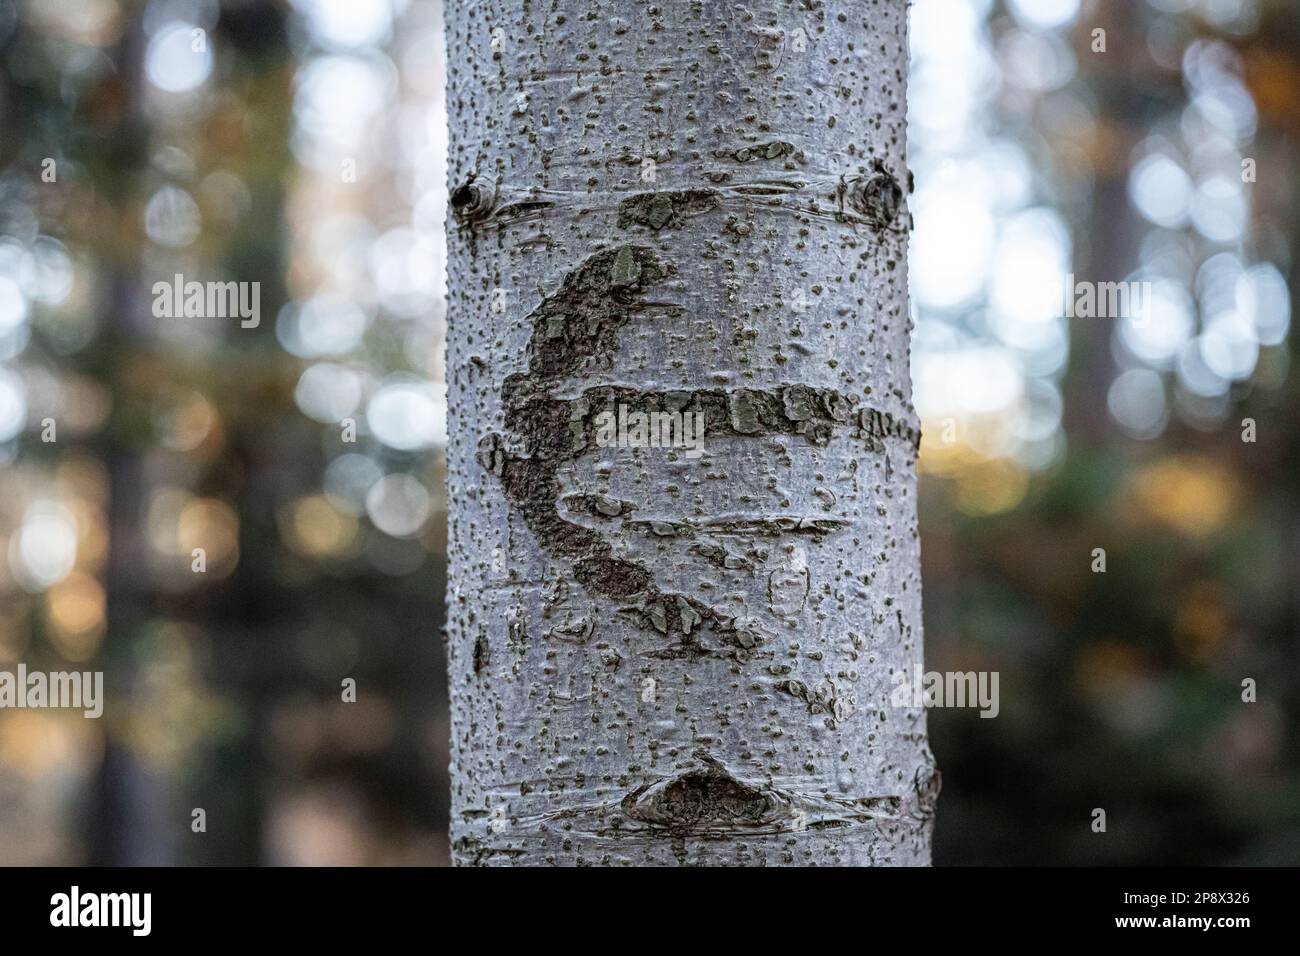 Arrow on the tree trunk of a birch in the forest and blurred background Stock Photo